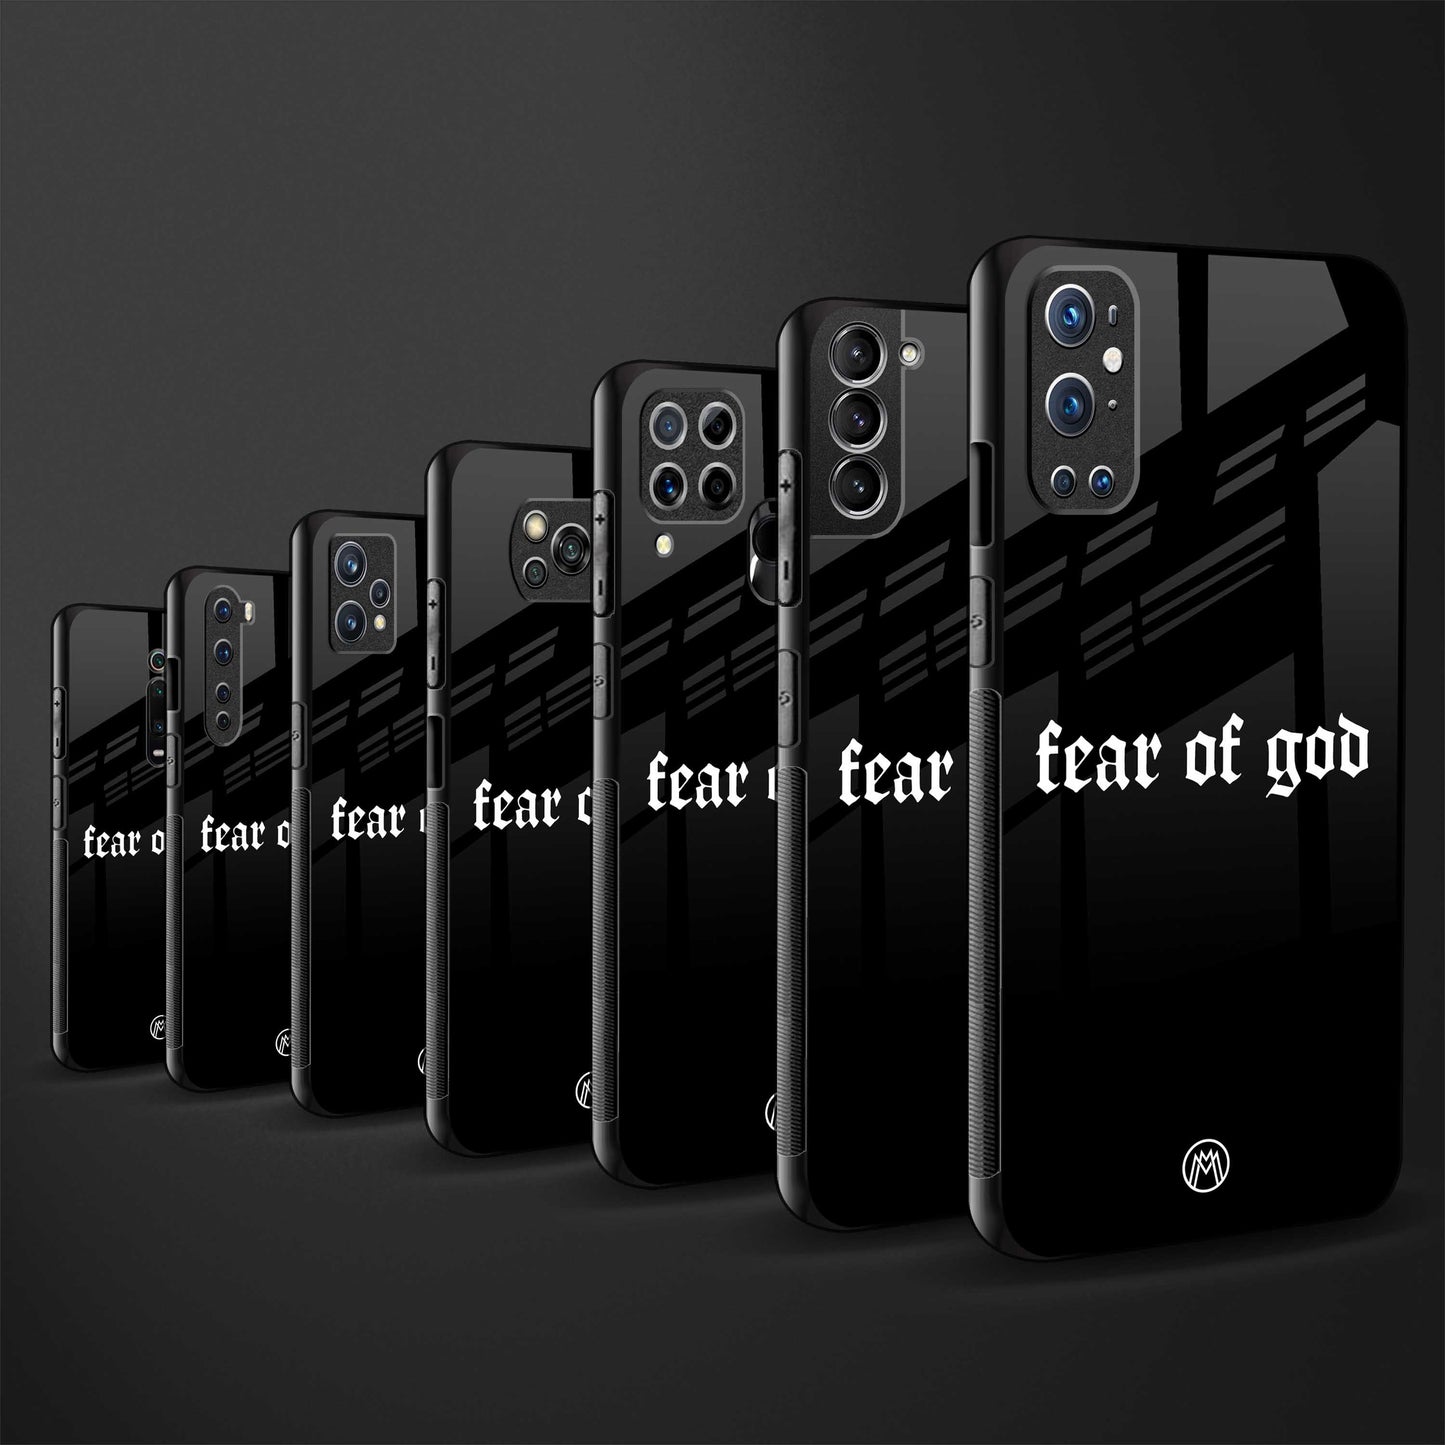 fear of god phone cover for realme c21